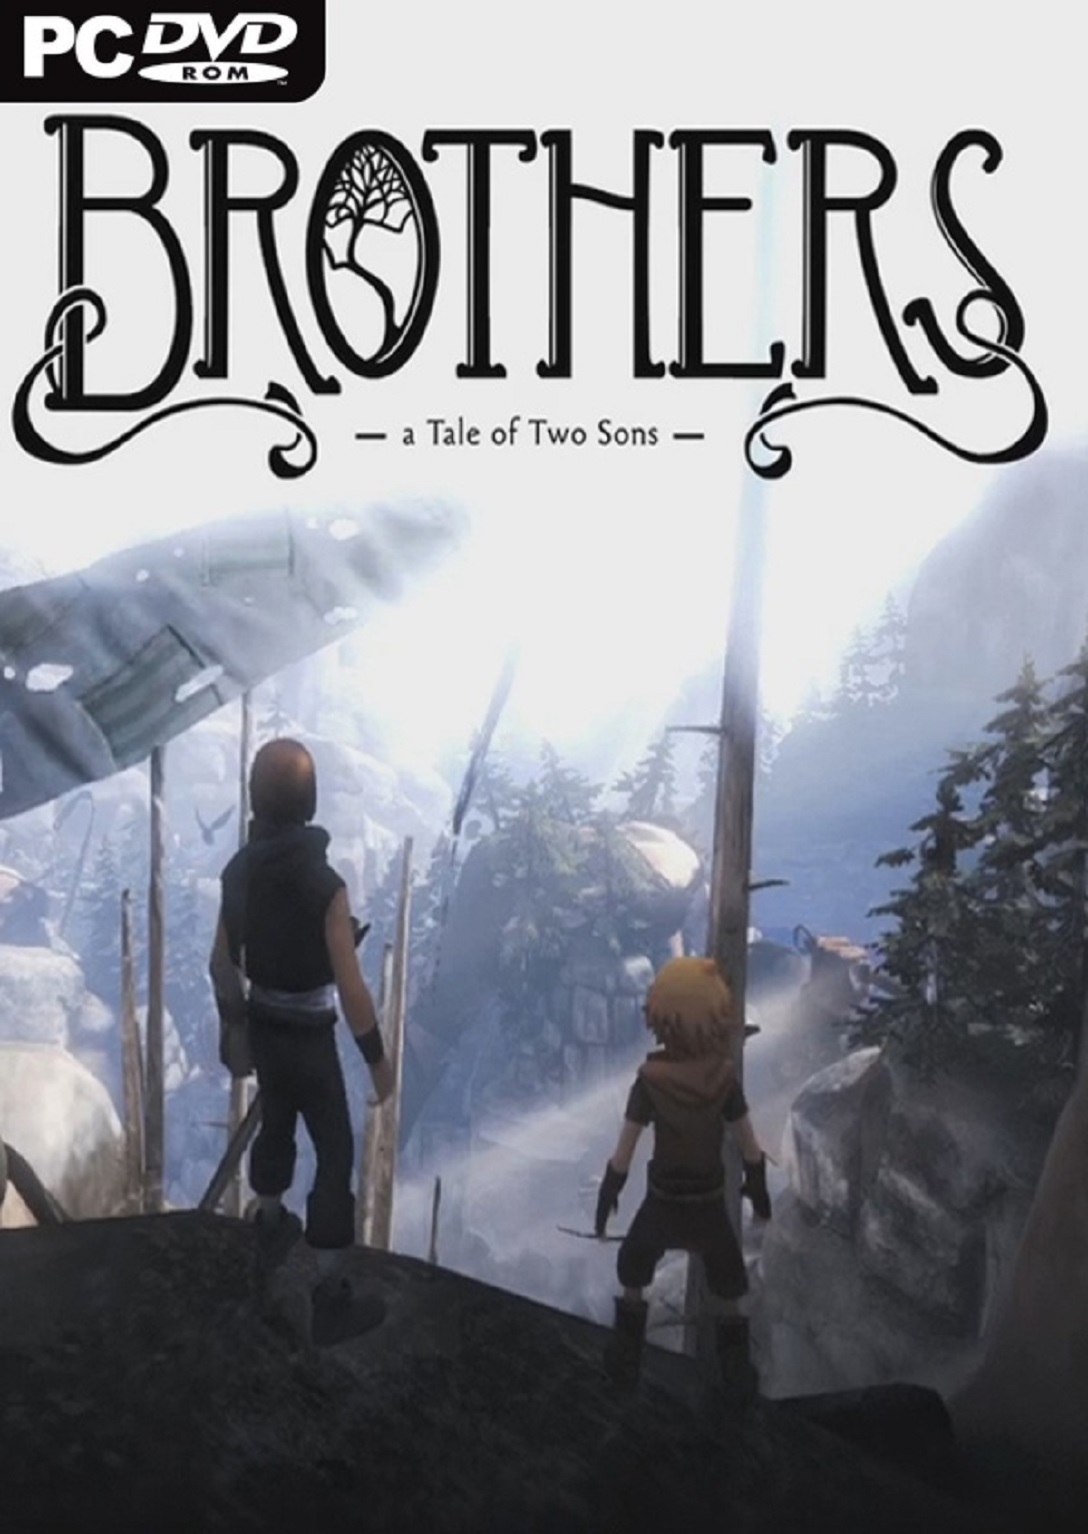 brothers a tale of two sons xbox download free